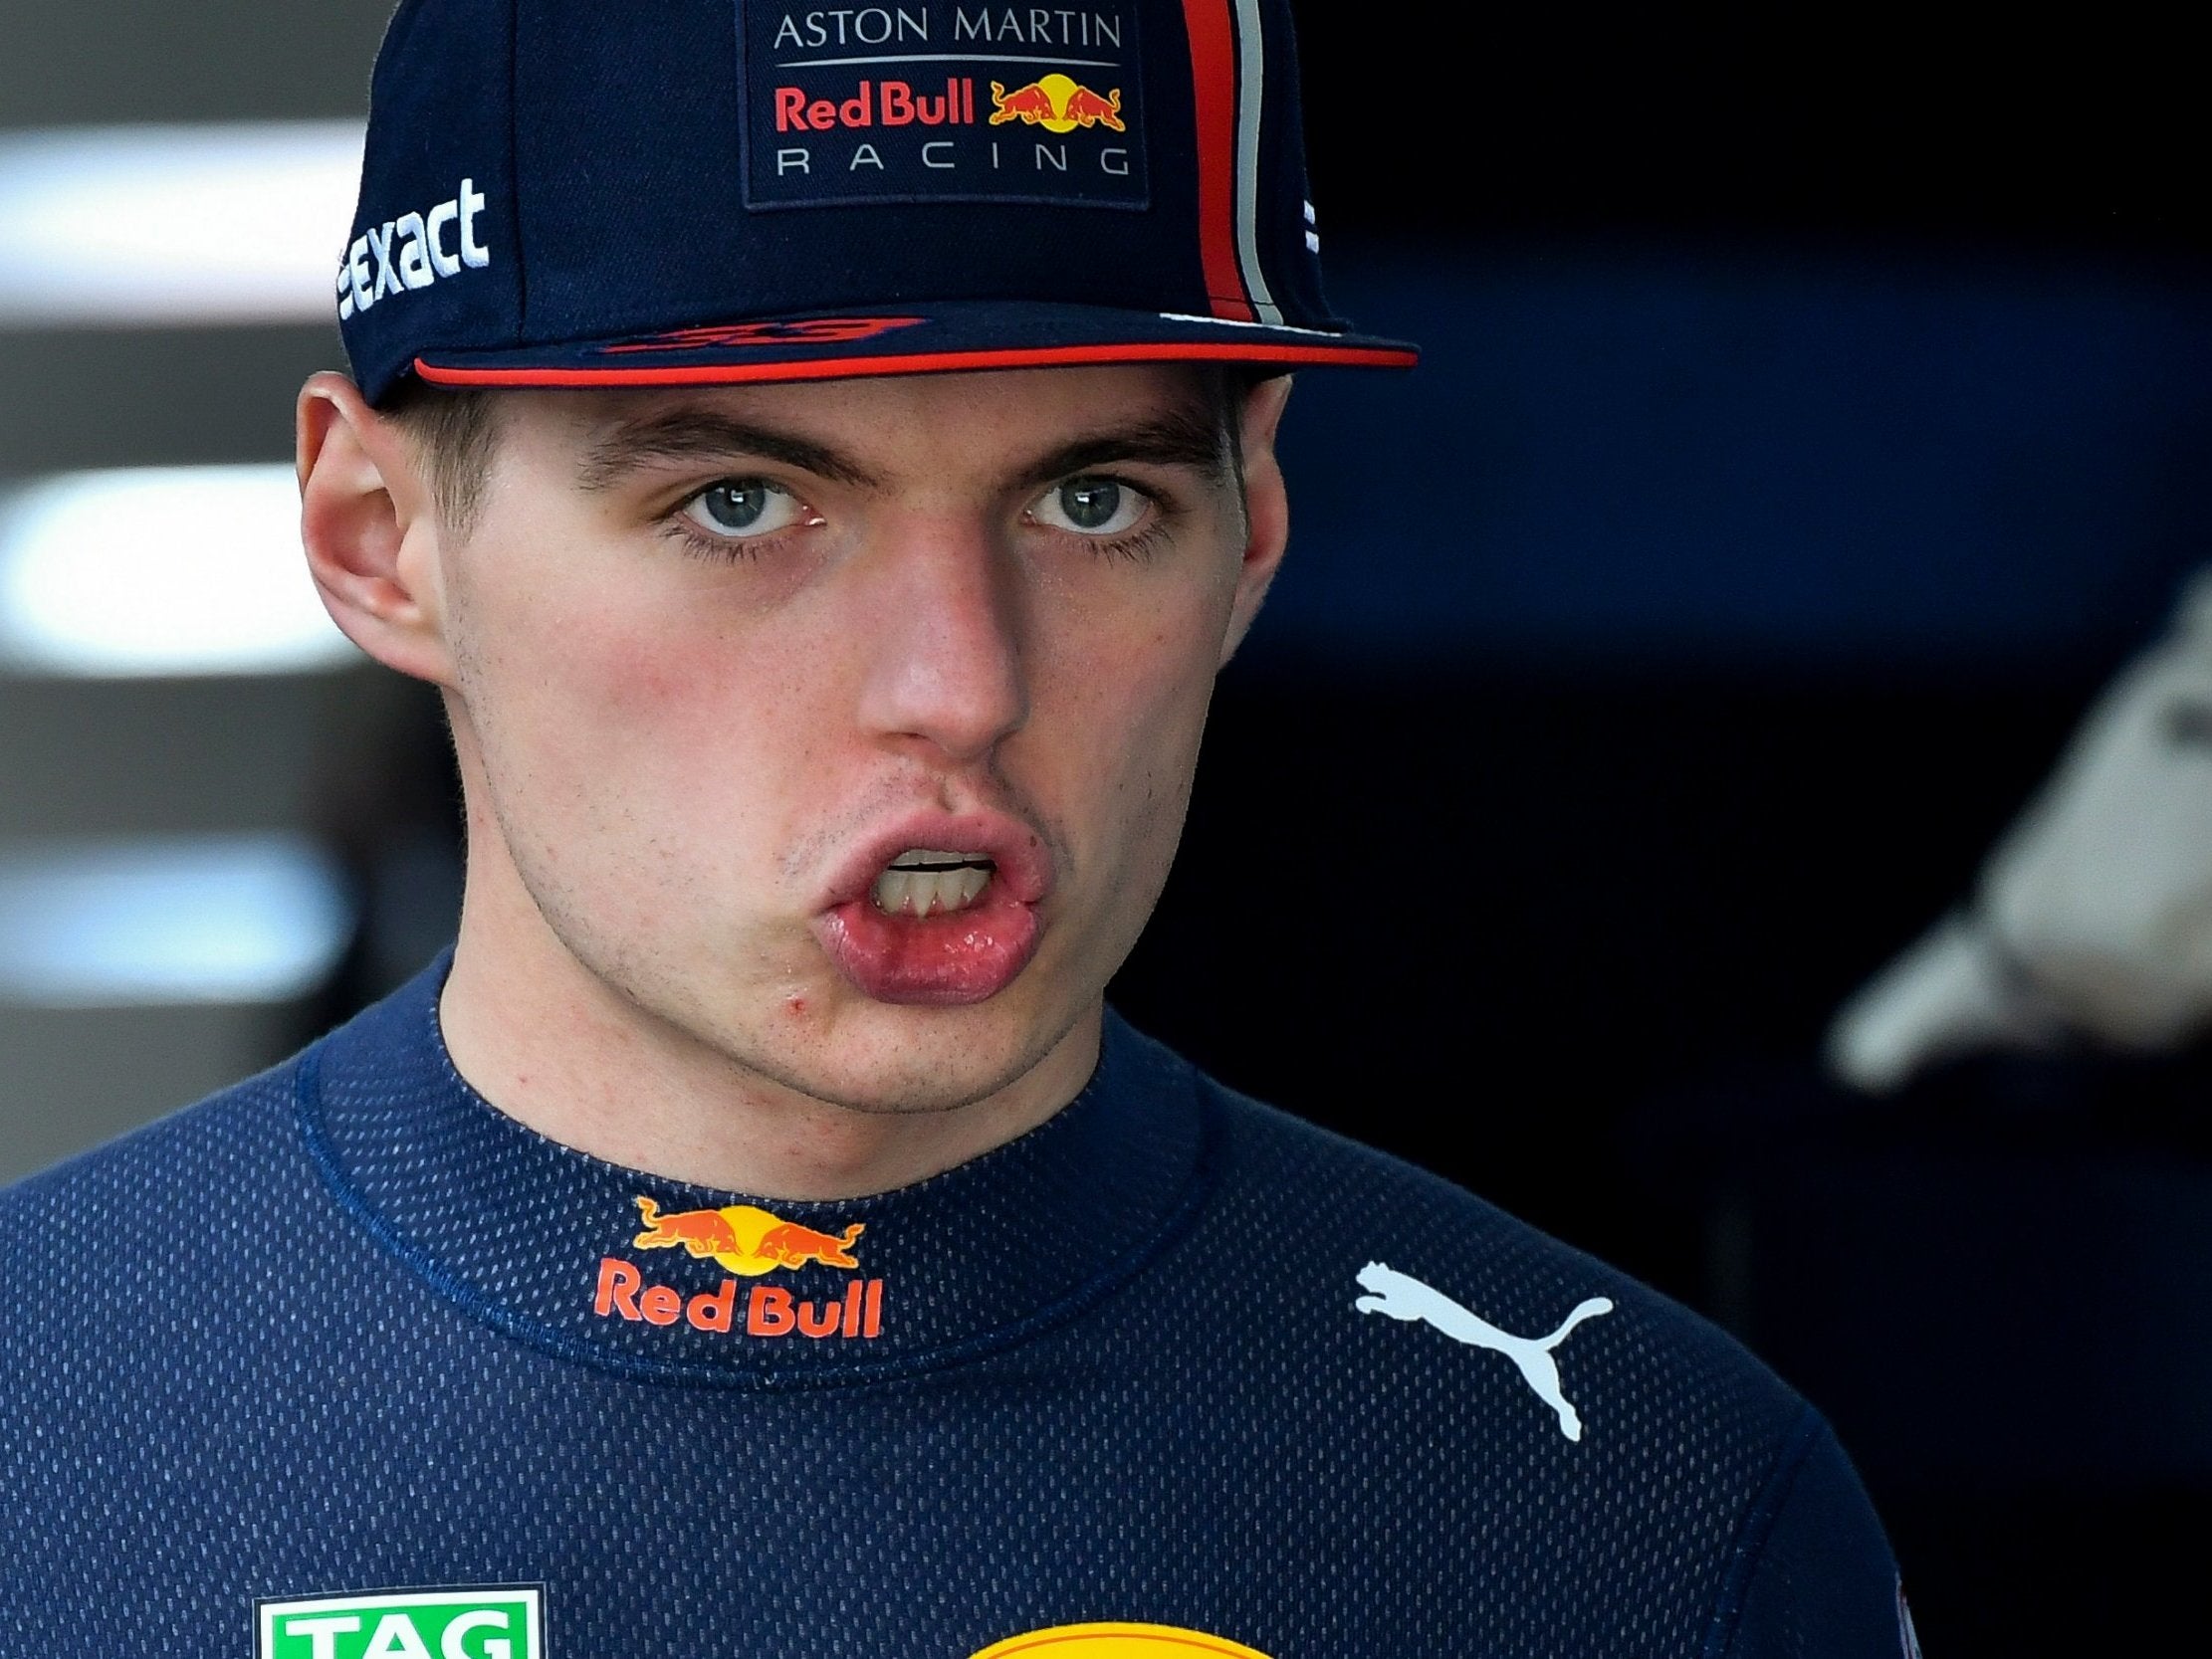 Chinese Grand Prix: Max Verstappen labels rivals 'w******' in X-rated